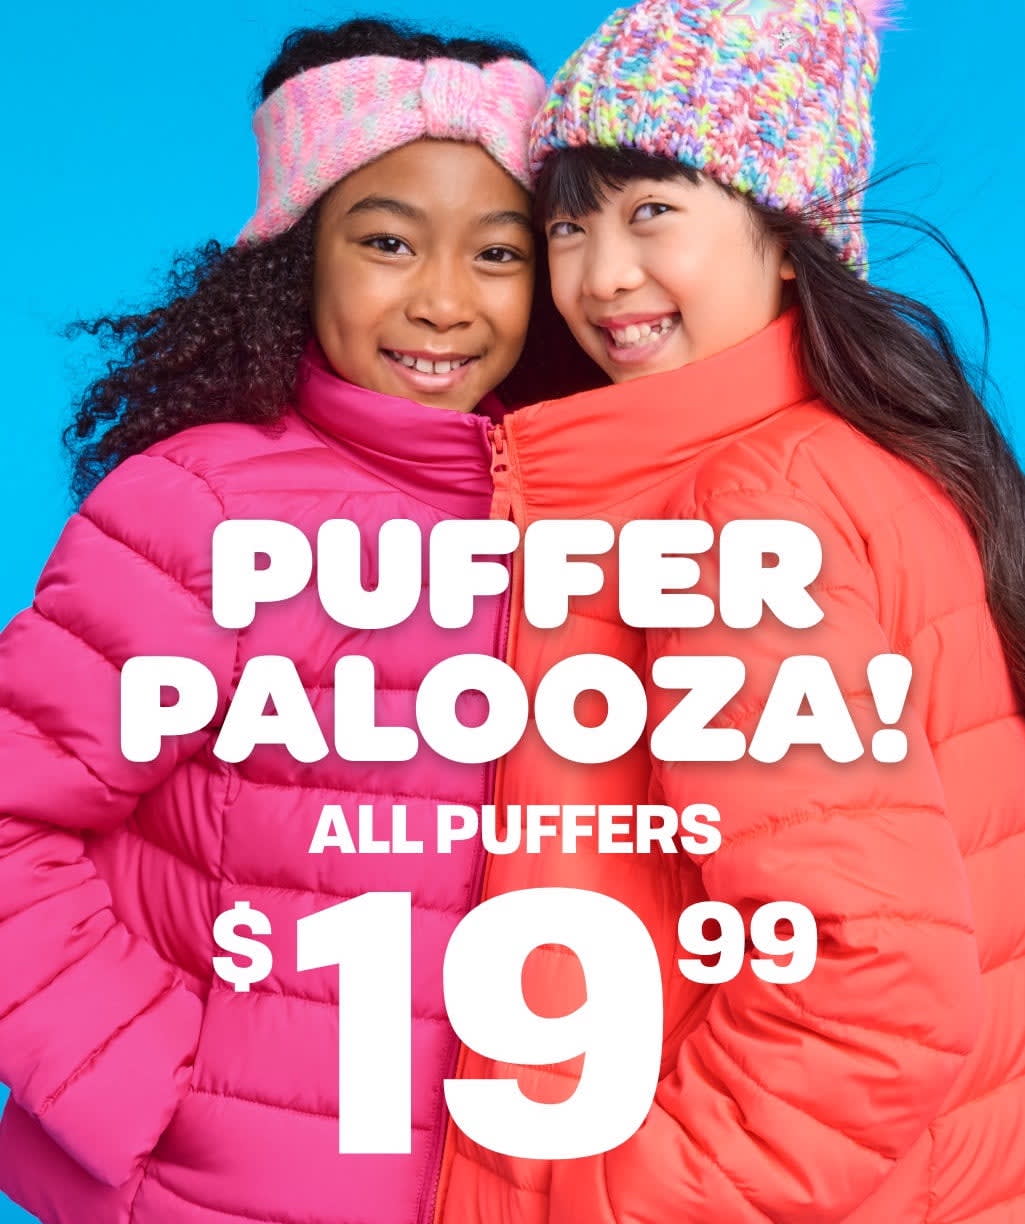 Puffer Palooza! Our Top rated jacket, back by popular demand! Now Only $19.99